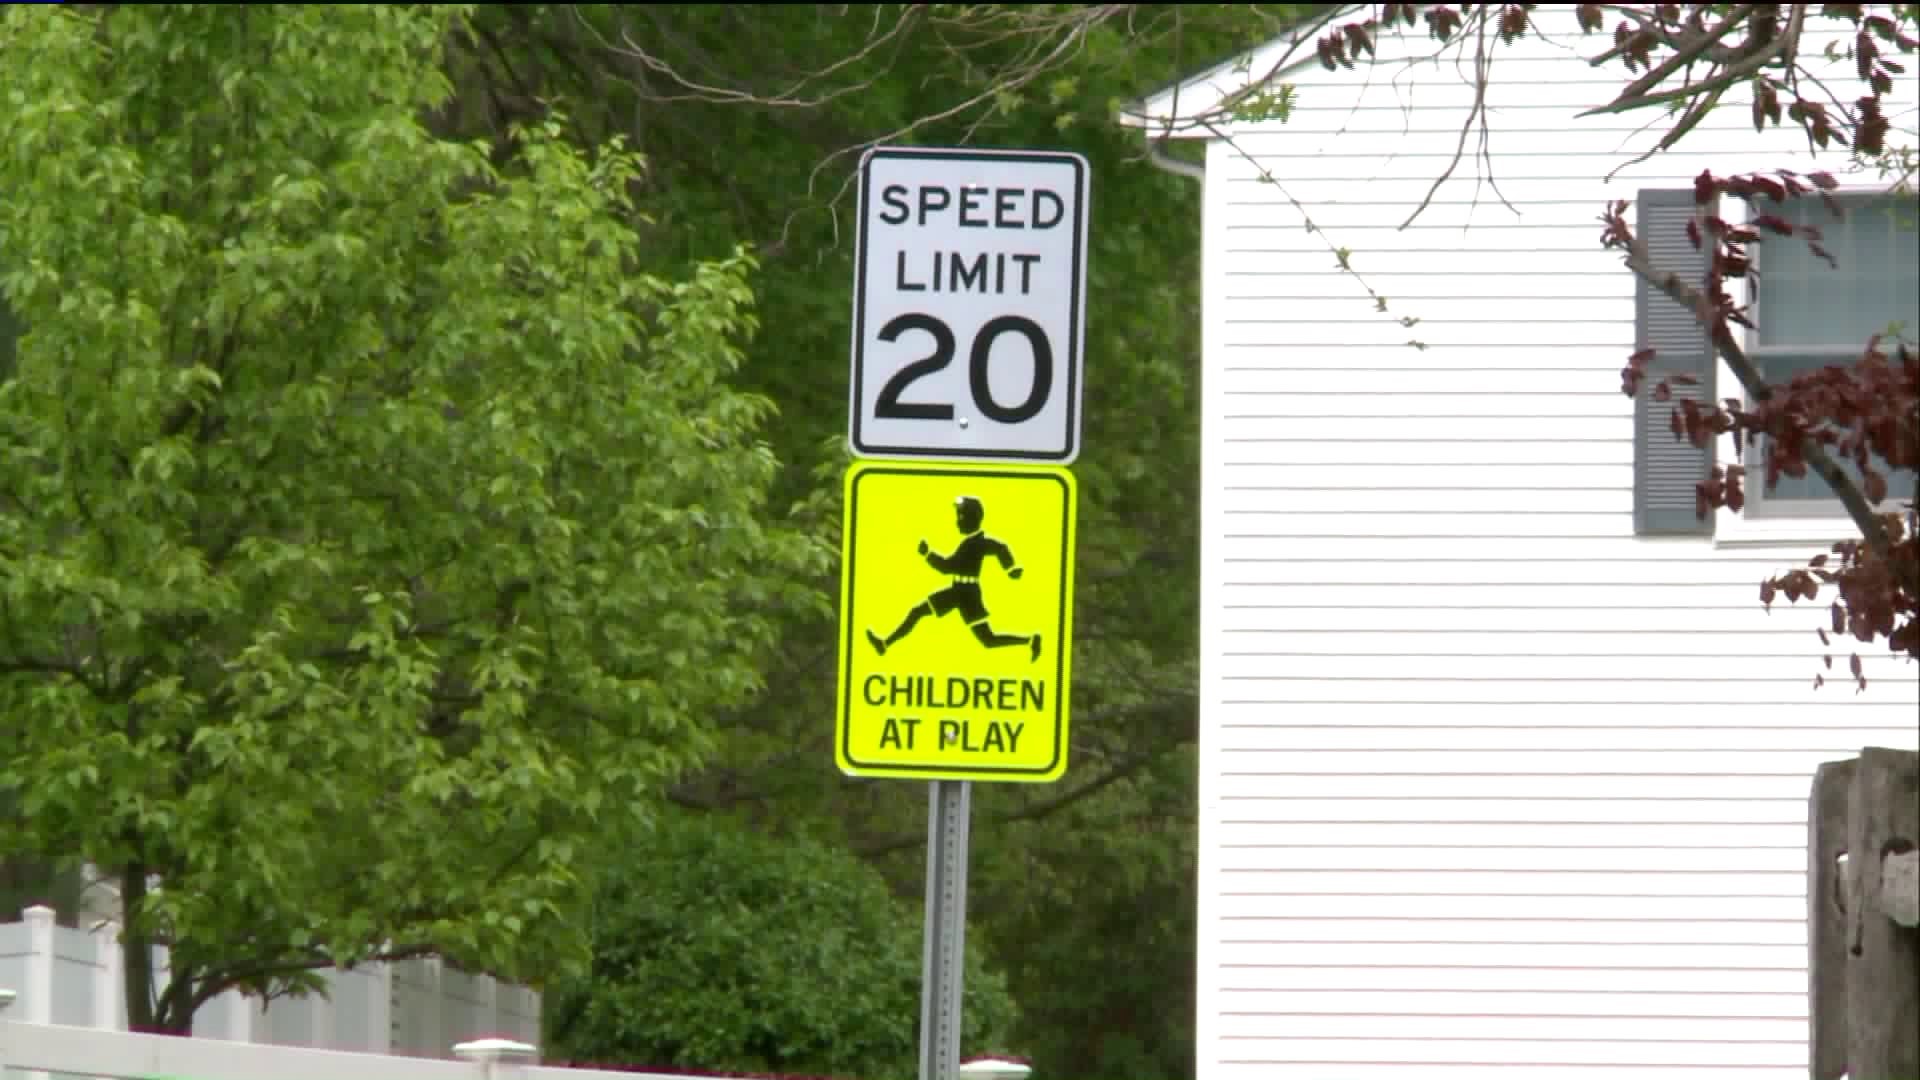 12-year-old Darien student struck by distracted driver